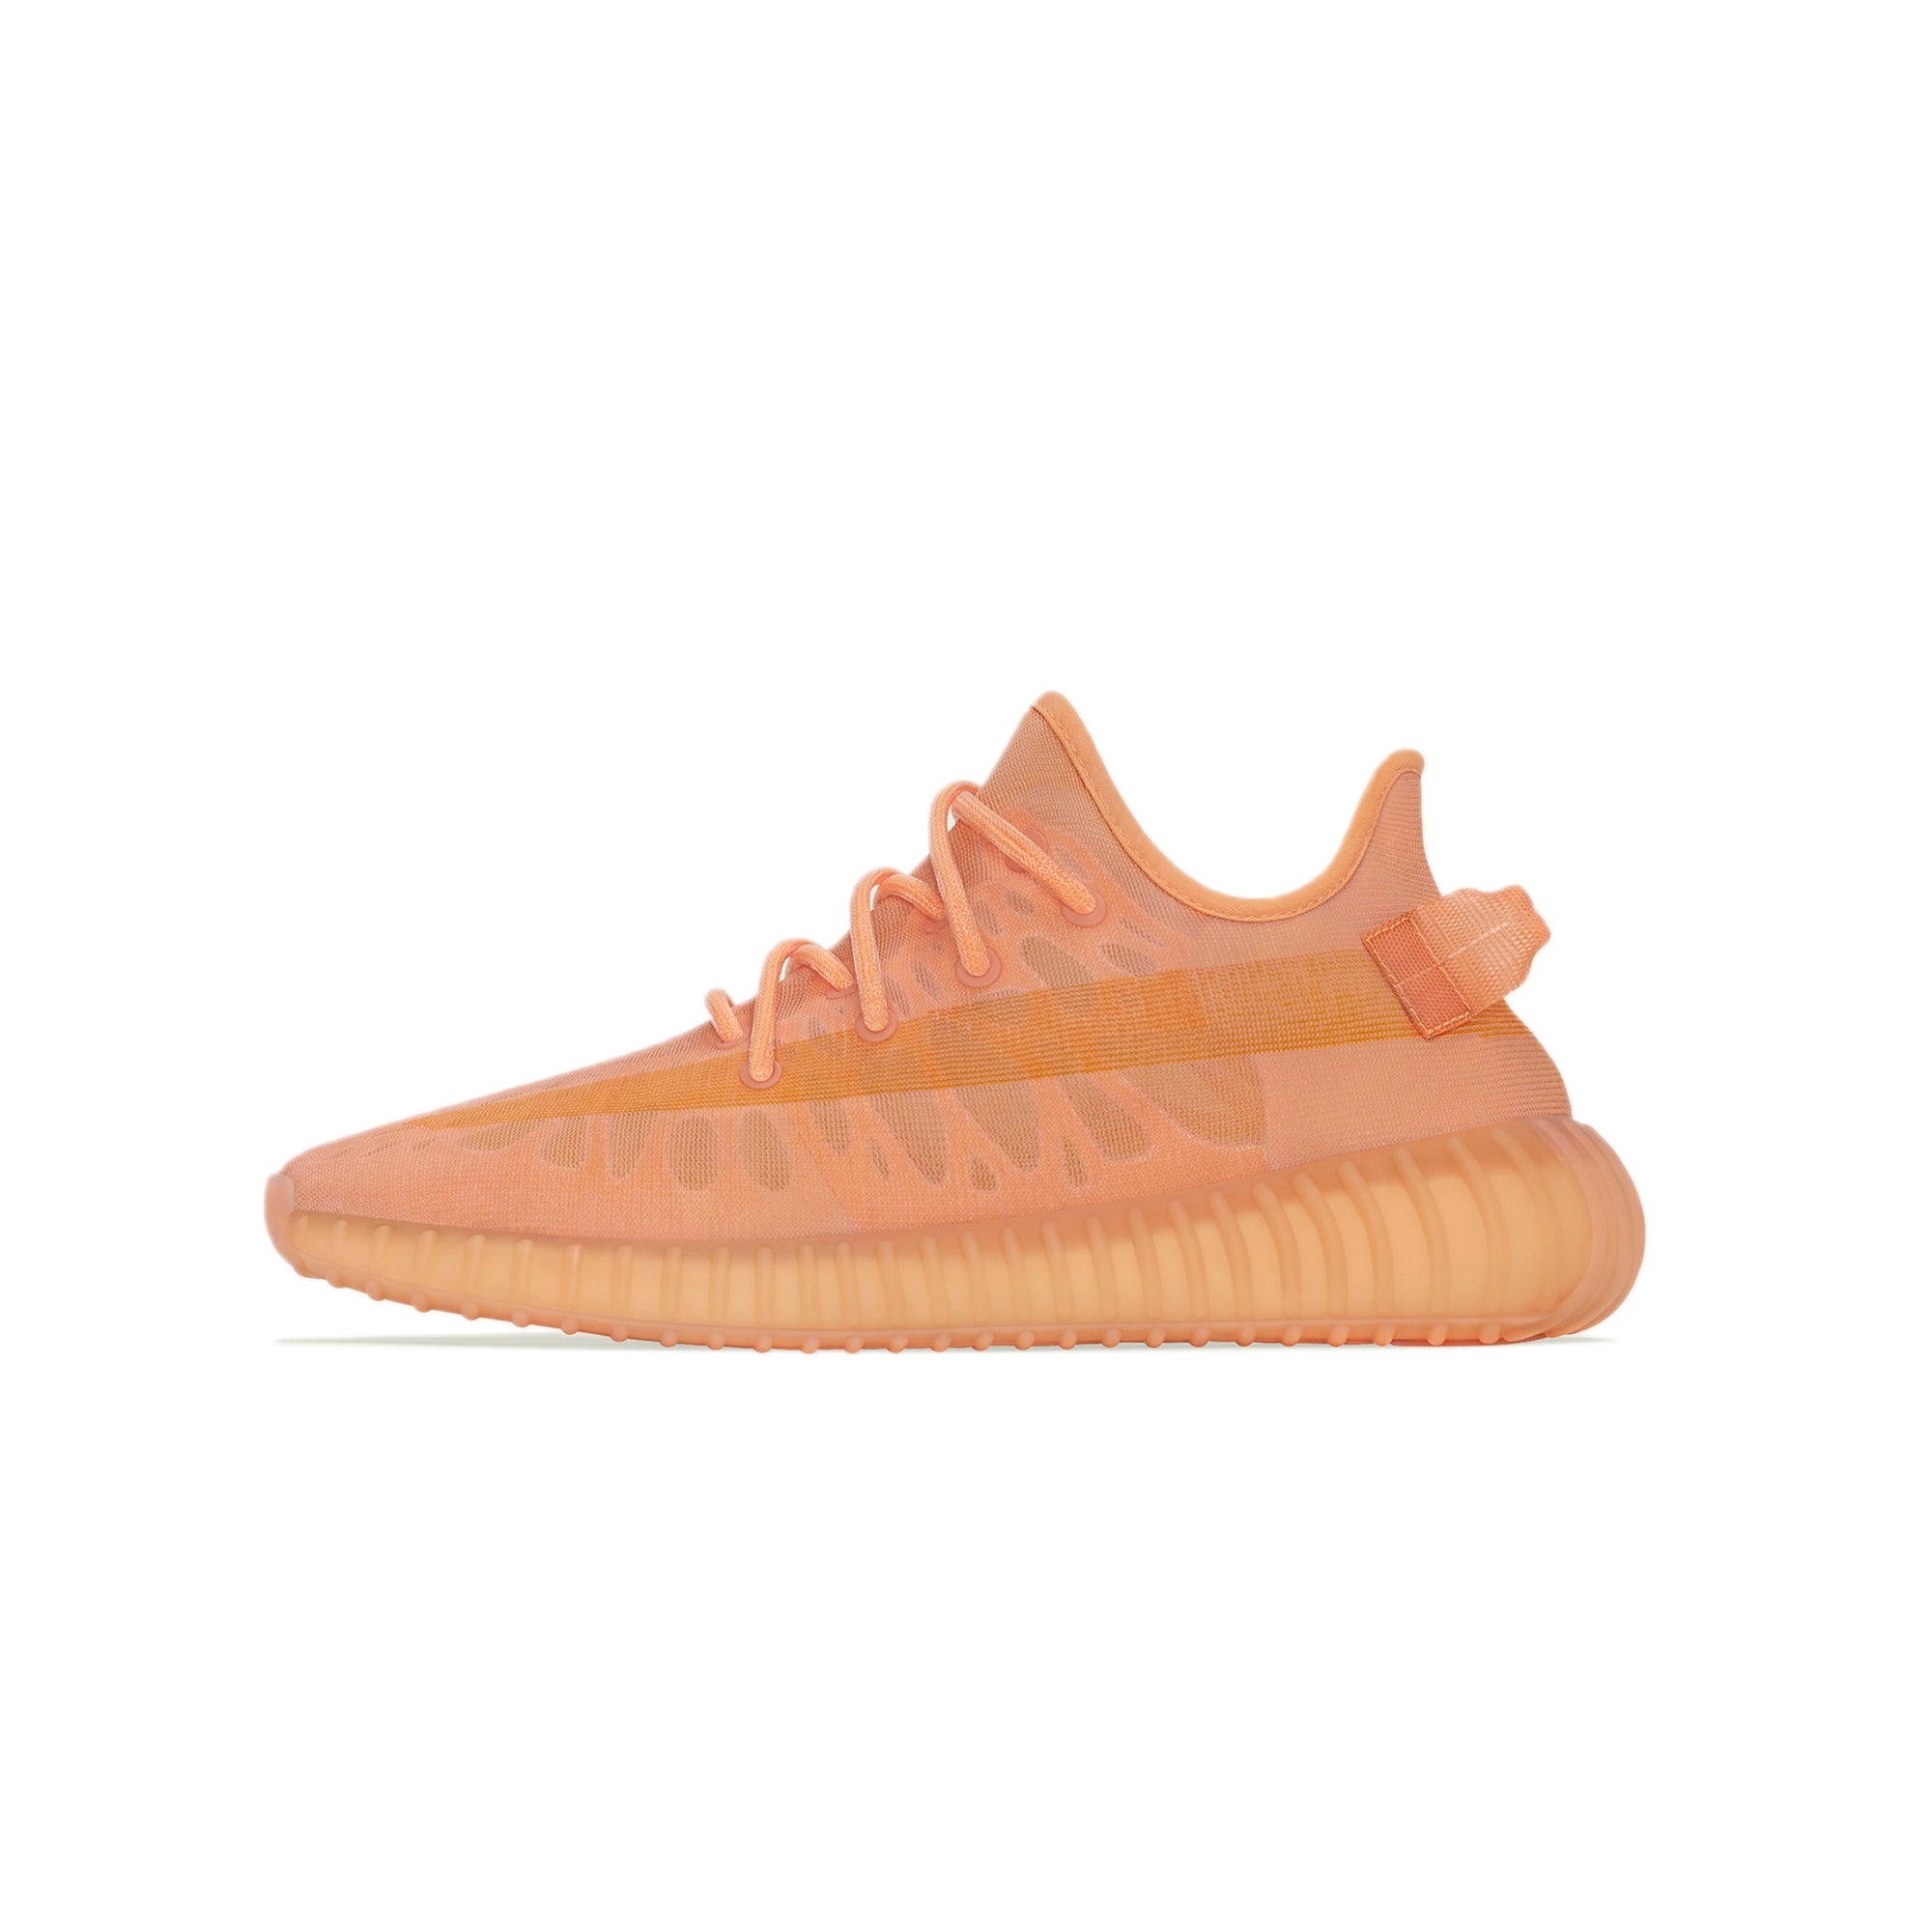 Adidas YEEZY Boost 350 v2 Mono Clay Shoes – Extra Butter